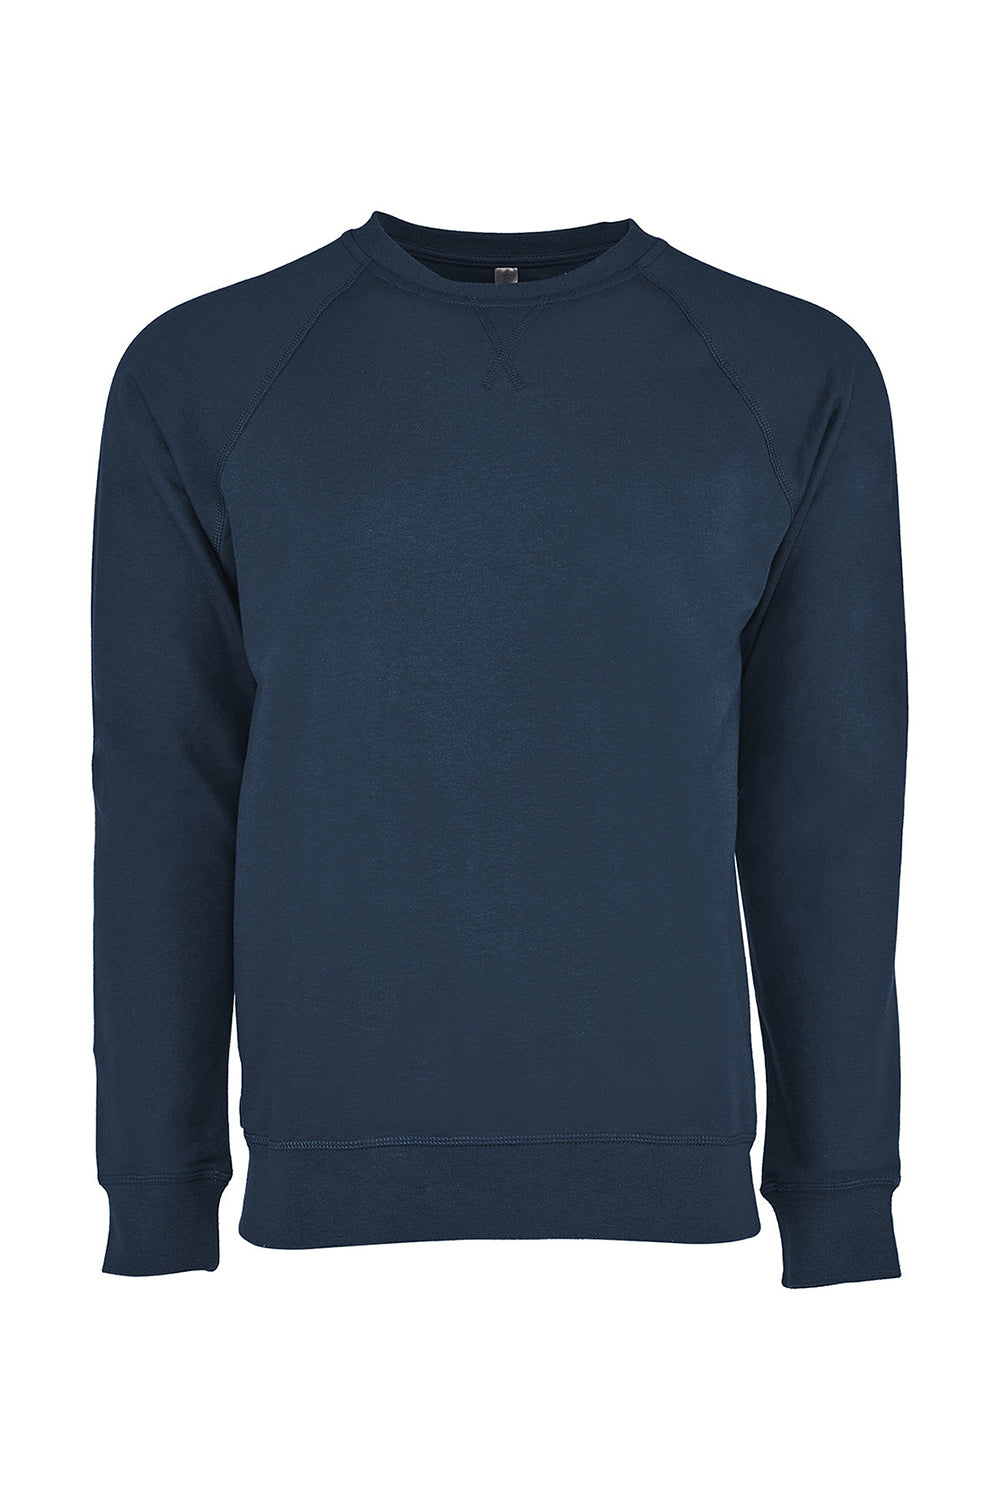 Next Level N9000/9000 Mens French Terry Long Sleeve Crewneck T-Shirt Cool Blue Flat Front